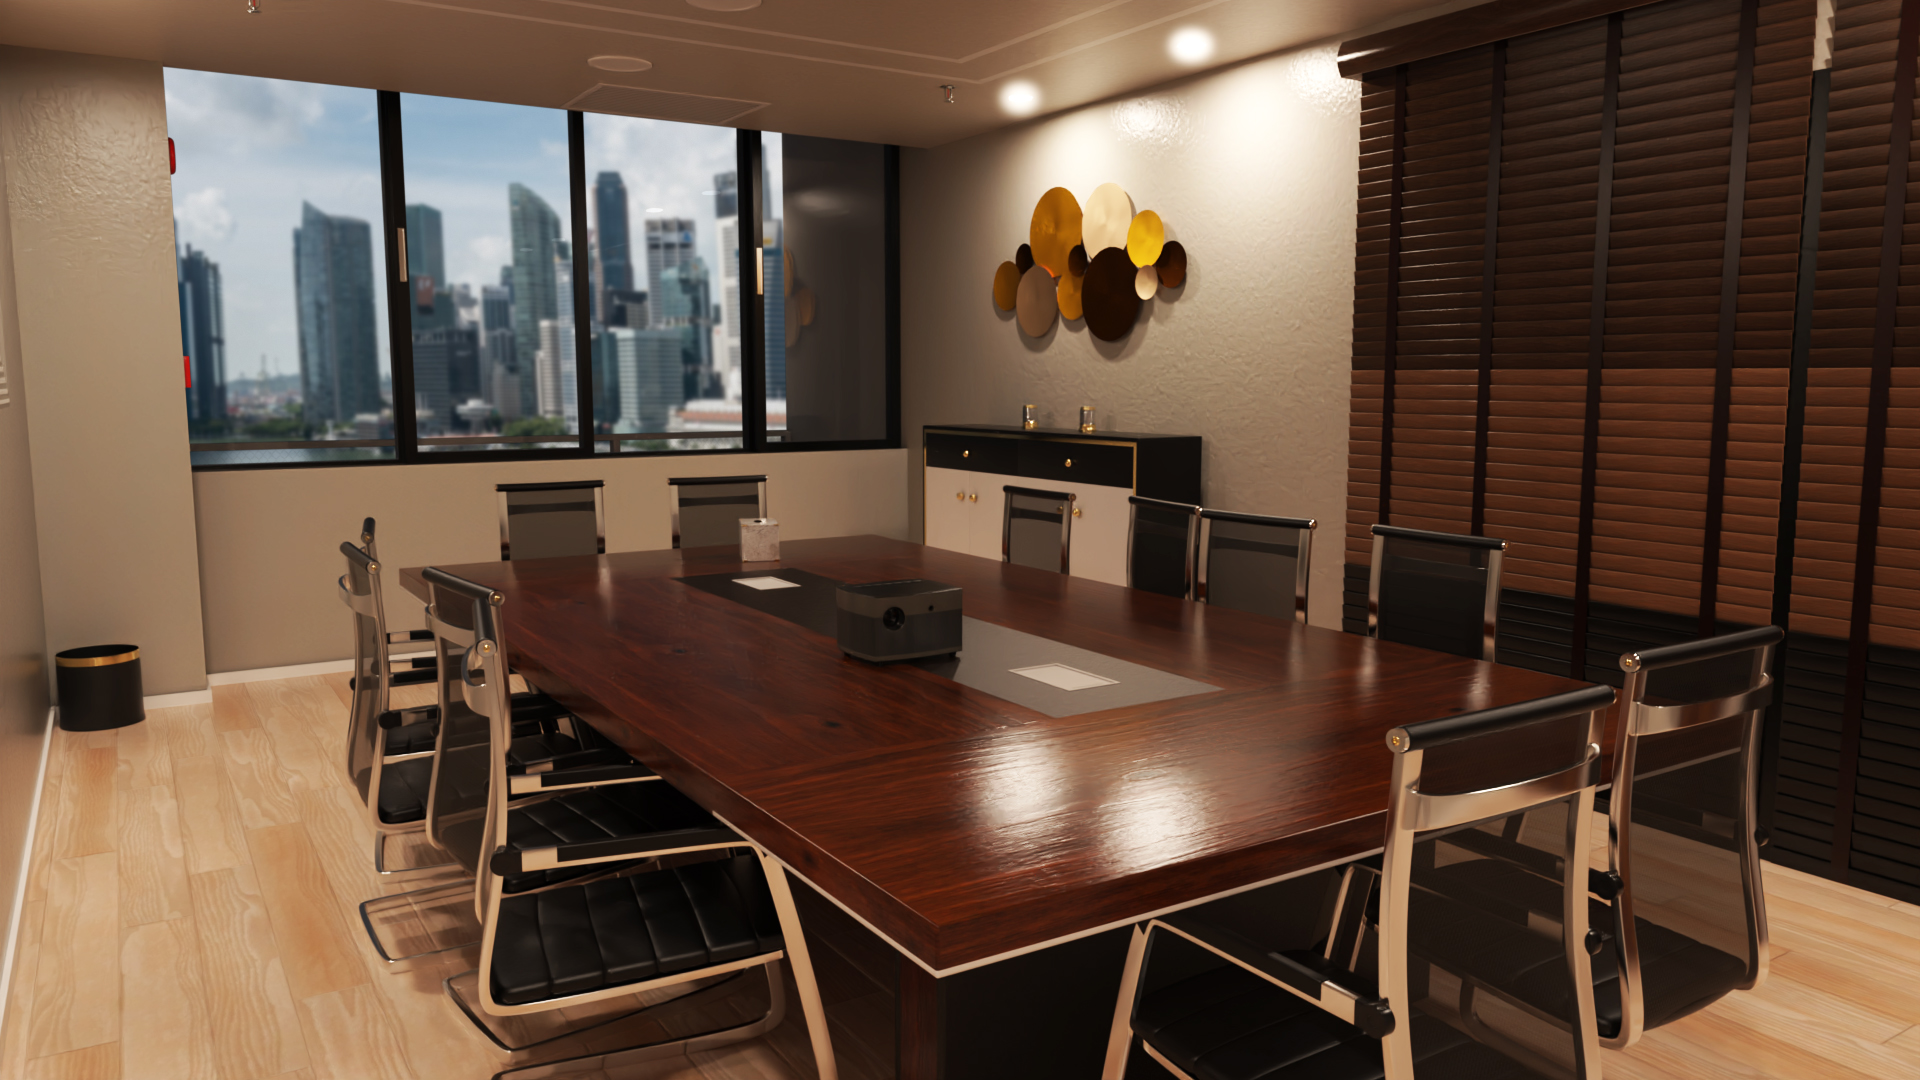 Marina Conference Room by: Tesla3dCorp, 3D Models by Daz 3D